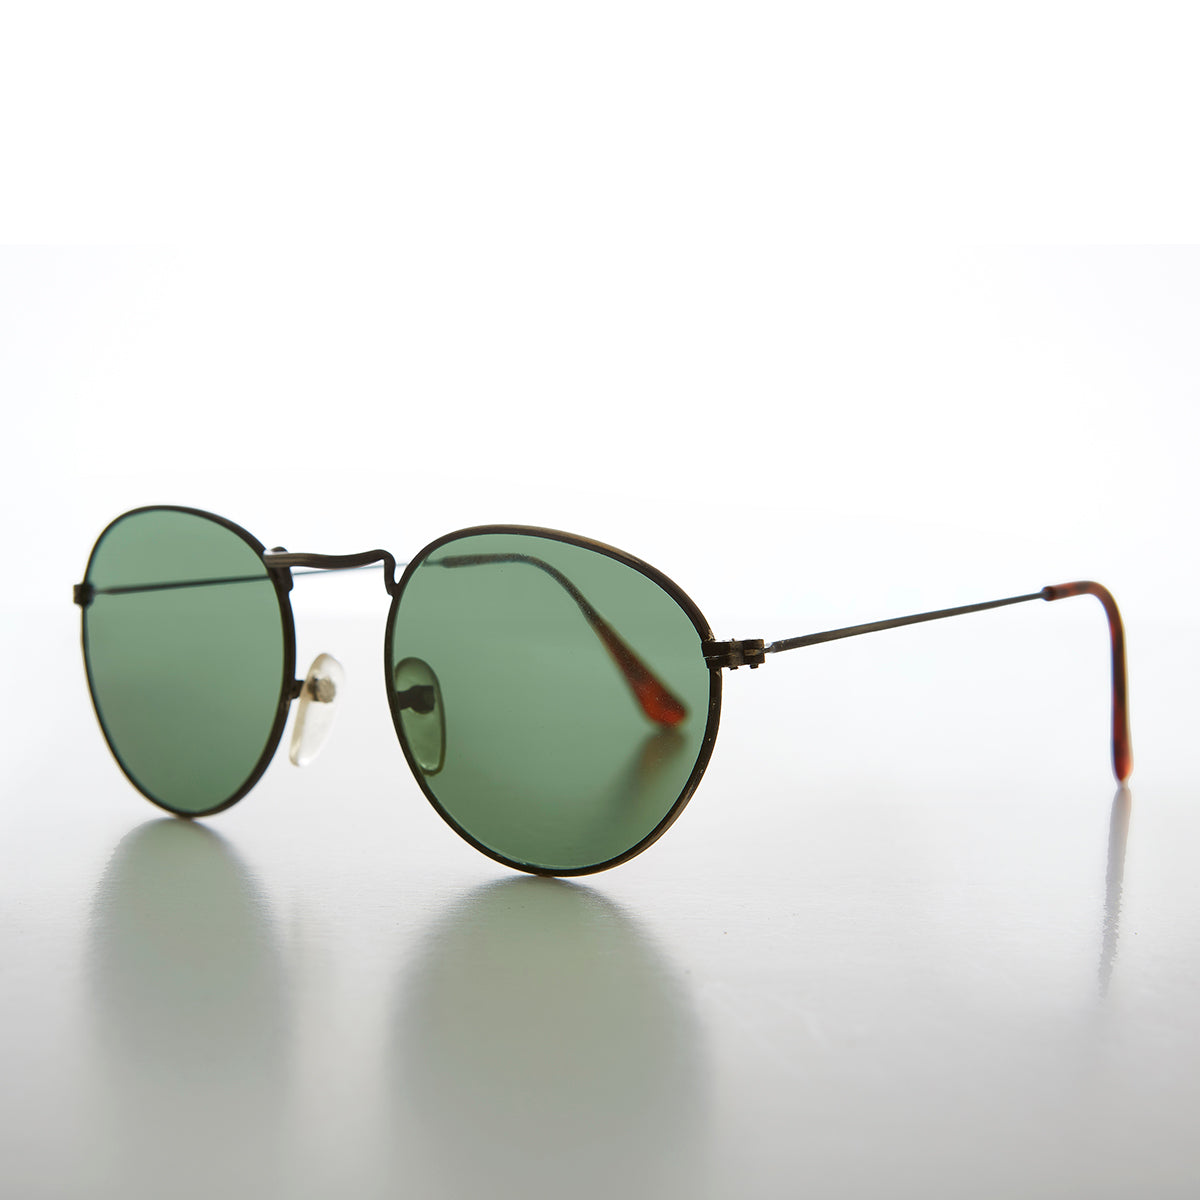 Simple Round Preppy Vintage Sunglass with Glass Lens - Miller